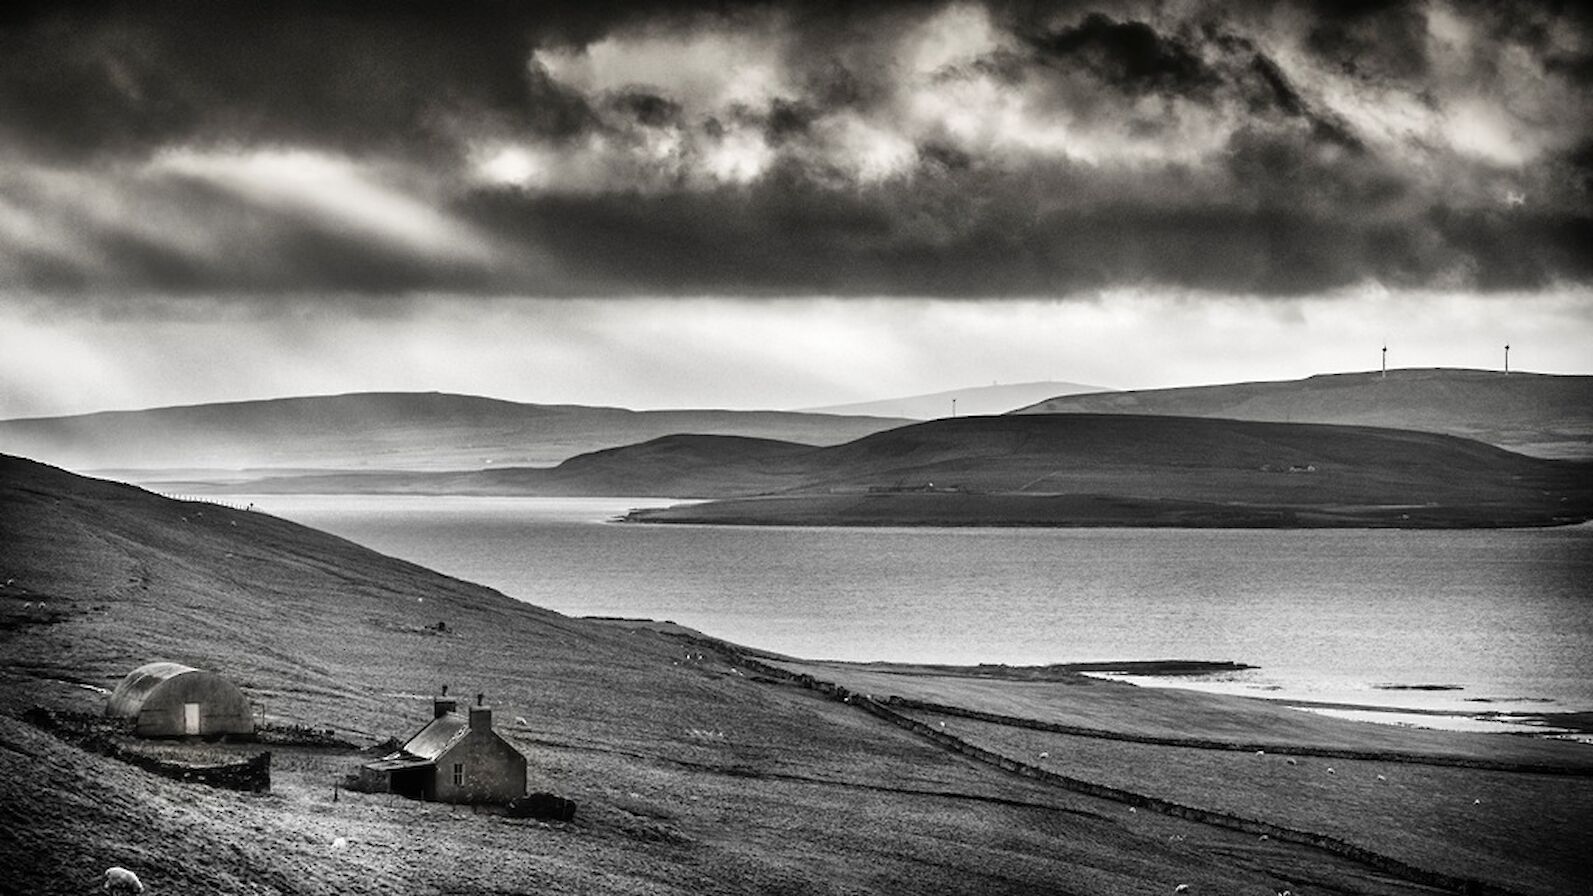 The view from Rousay - image by James Grieve